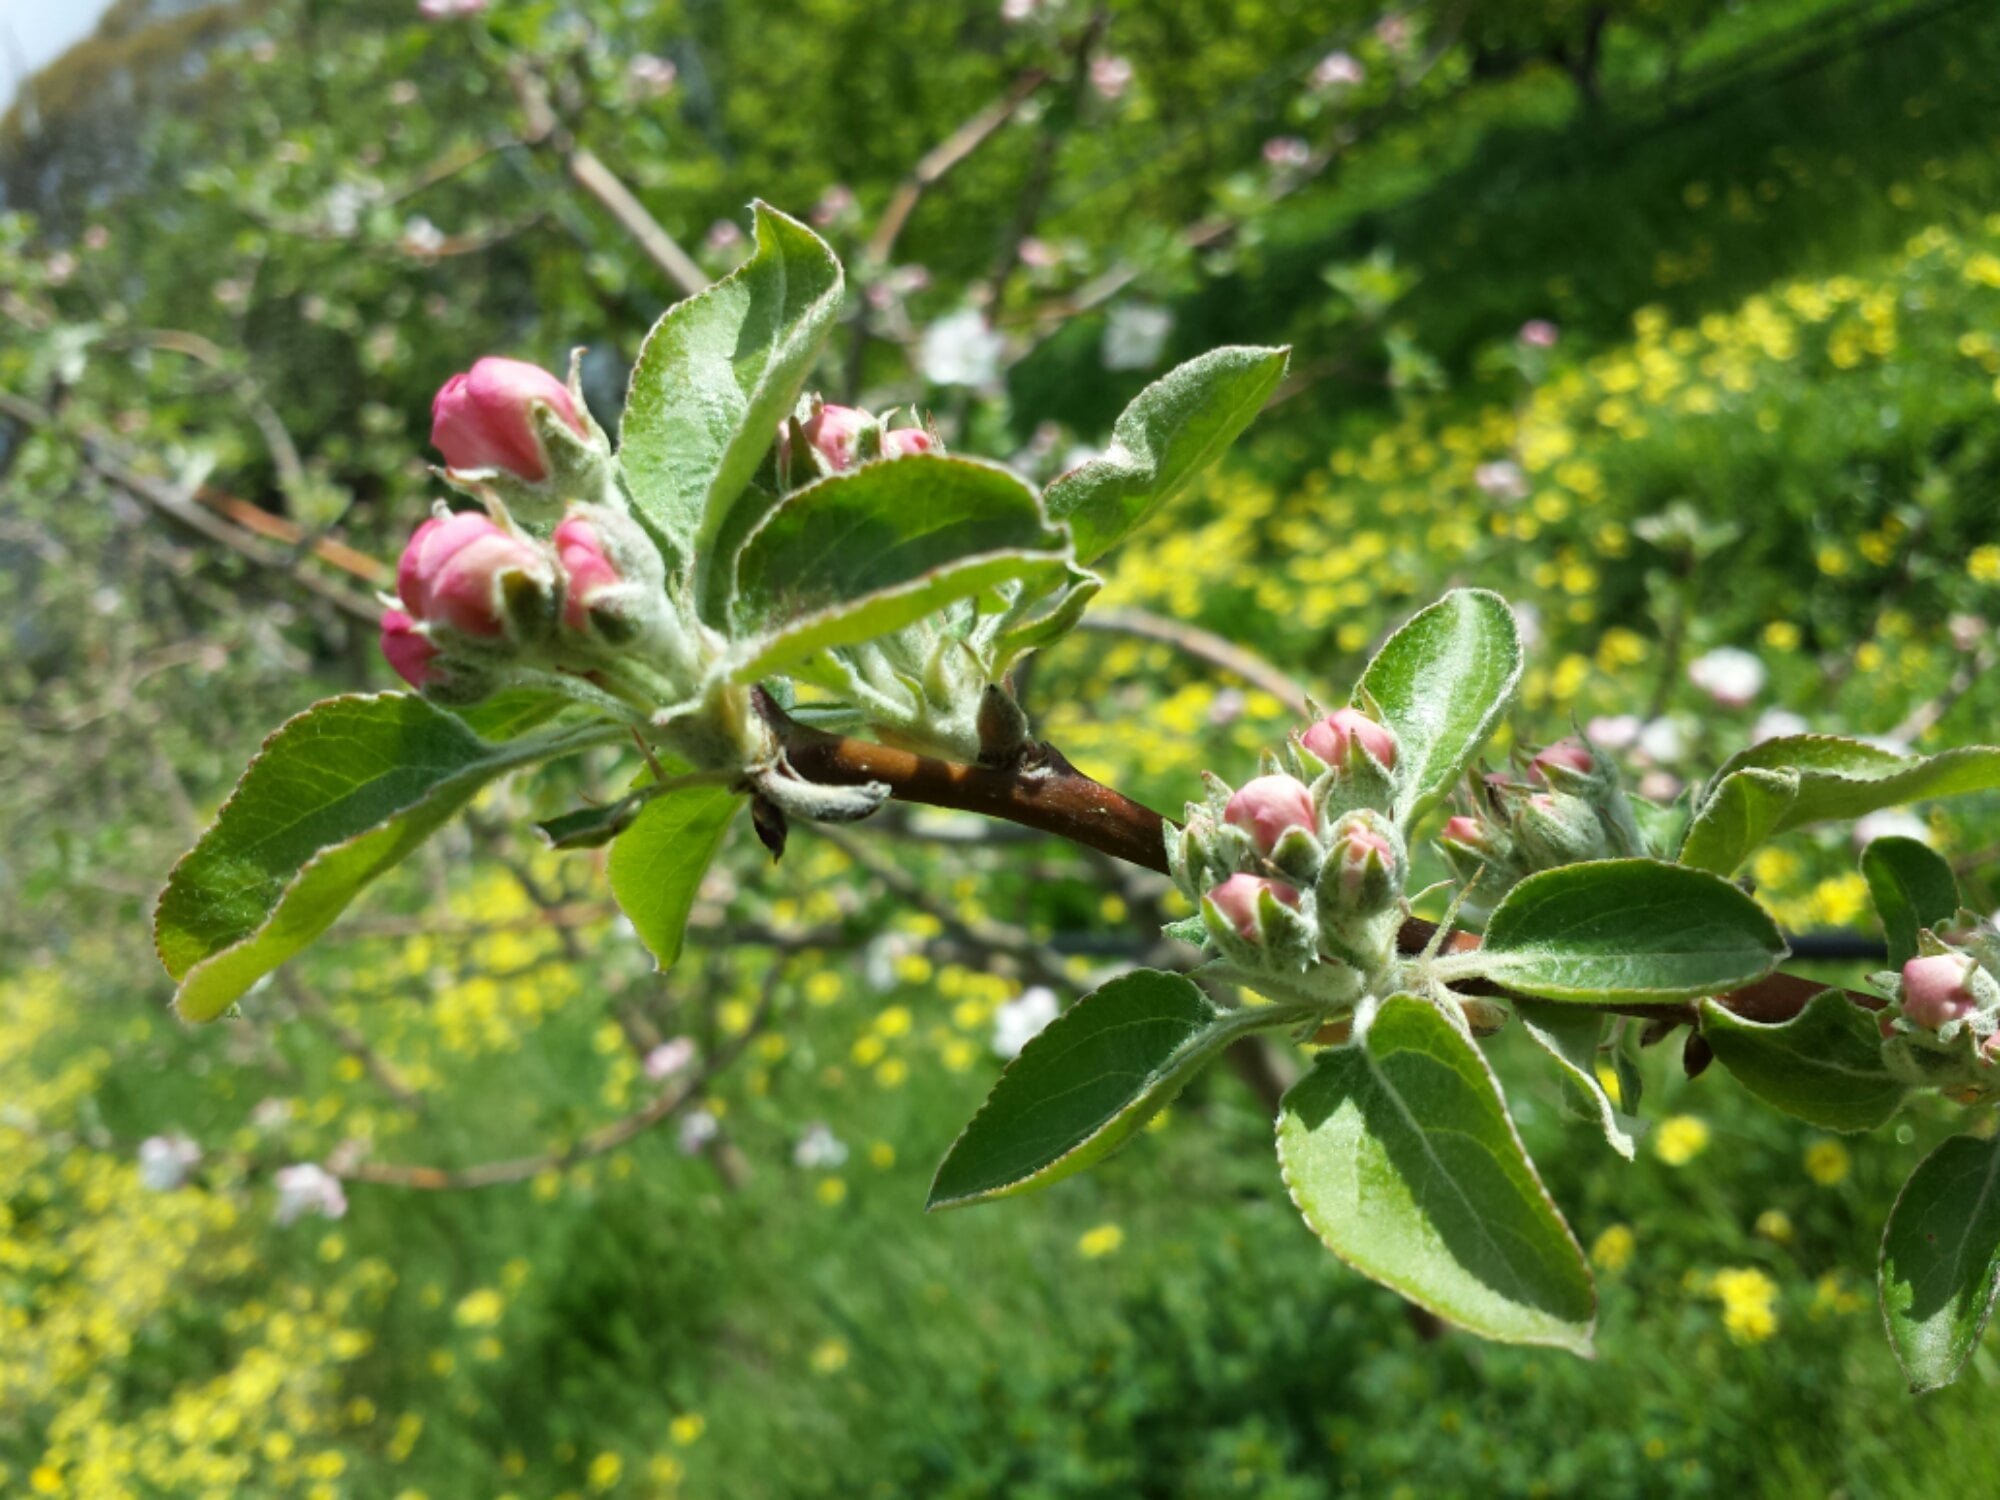 Gravenstein apple tree at the early pink bud stage of flowering